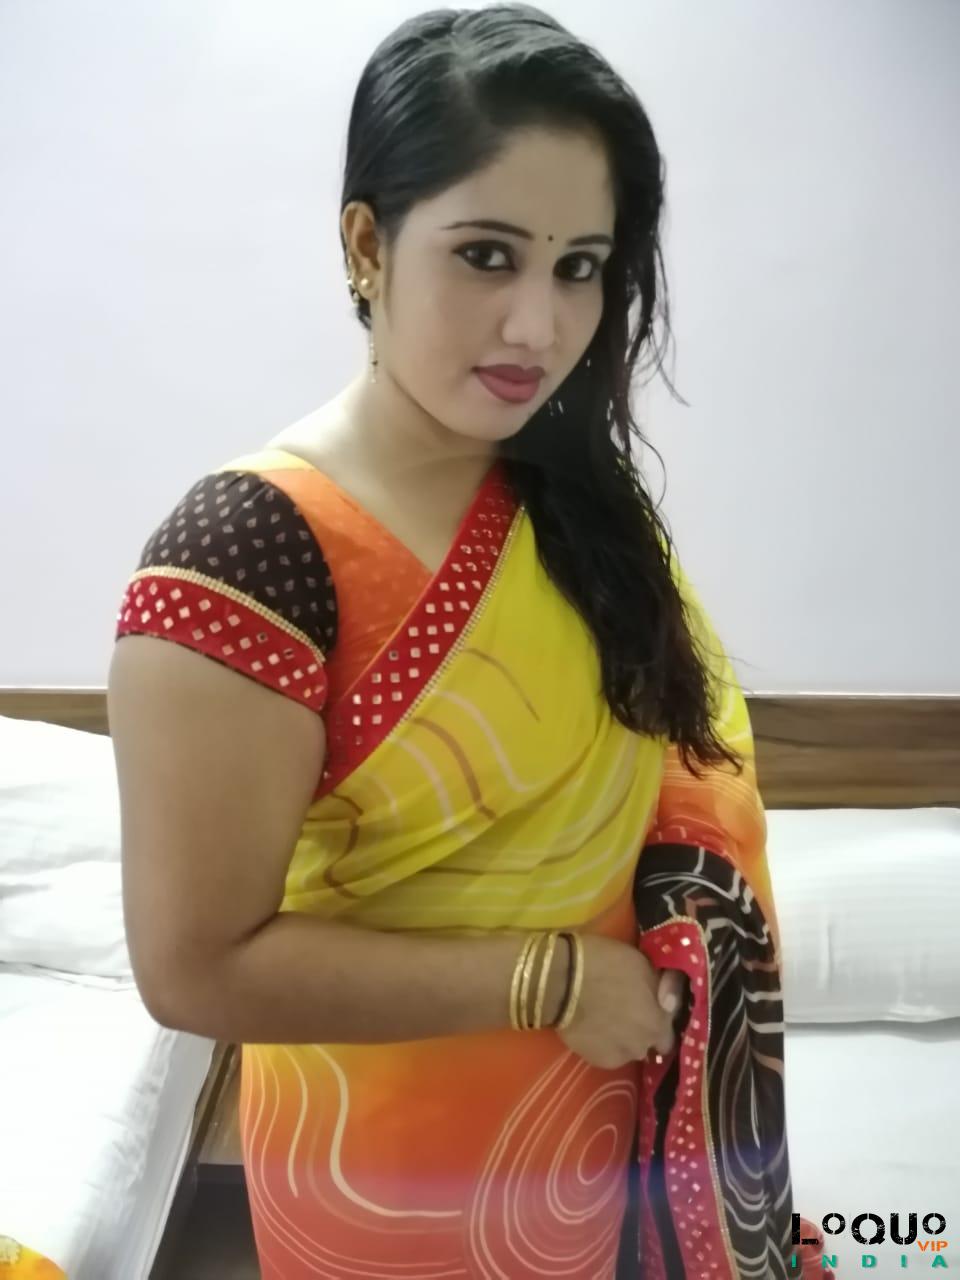 Call Girls Maharashtra: Chiplun SAFE AND SECURE TODAY LOW PRICE UNLIMITED ENJOY HOT COLLEGE GIRLS